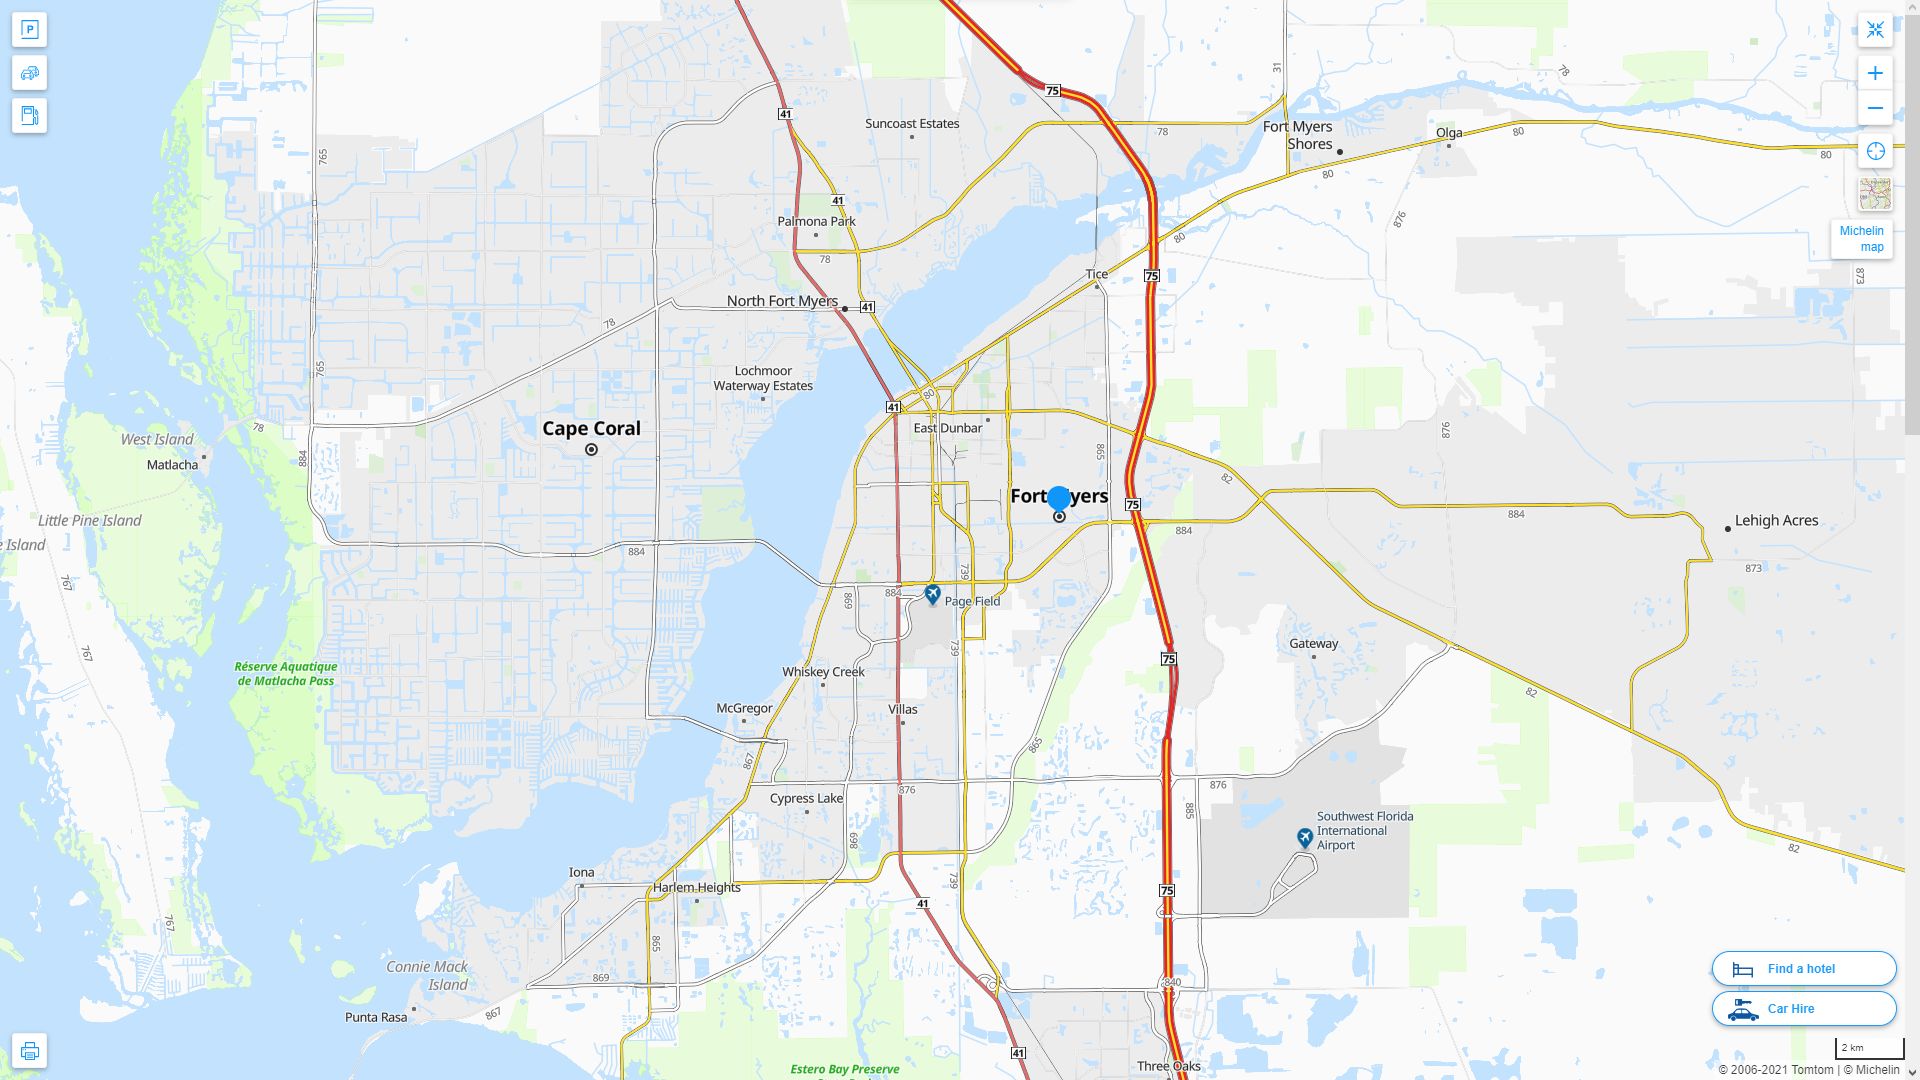 Fort Myers Florida Highway and Road Map